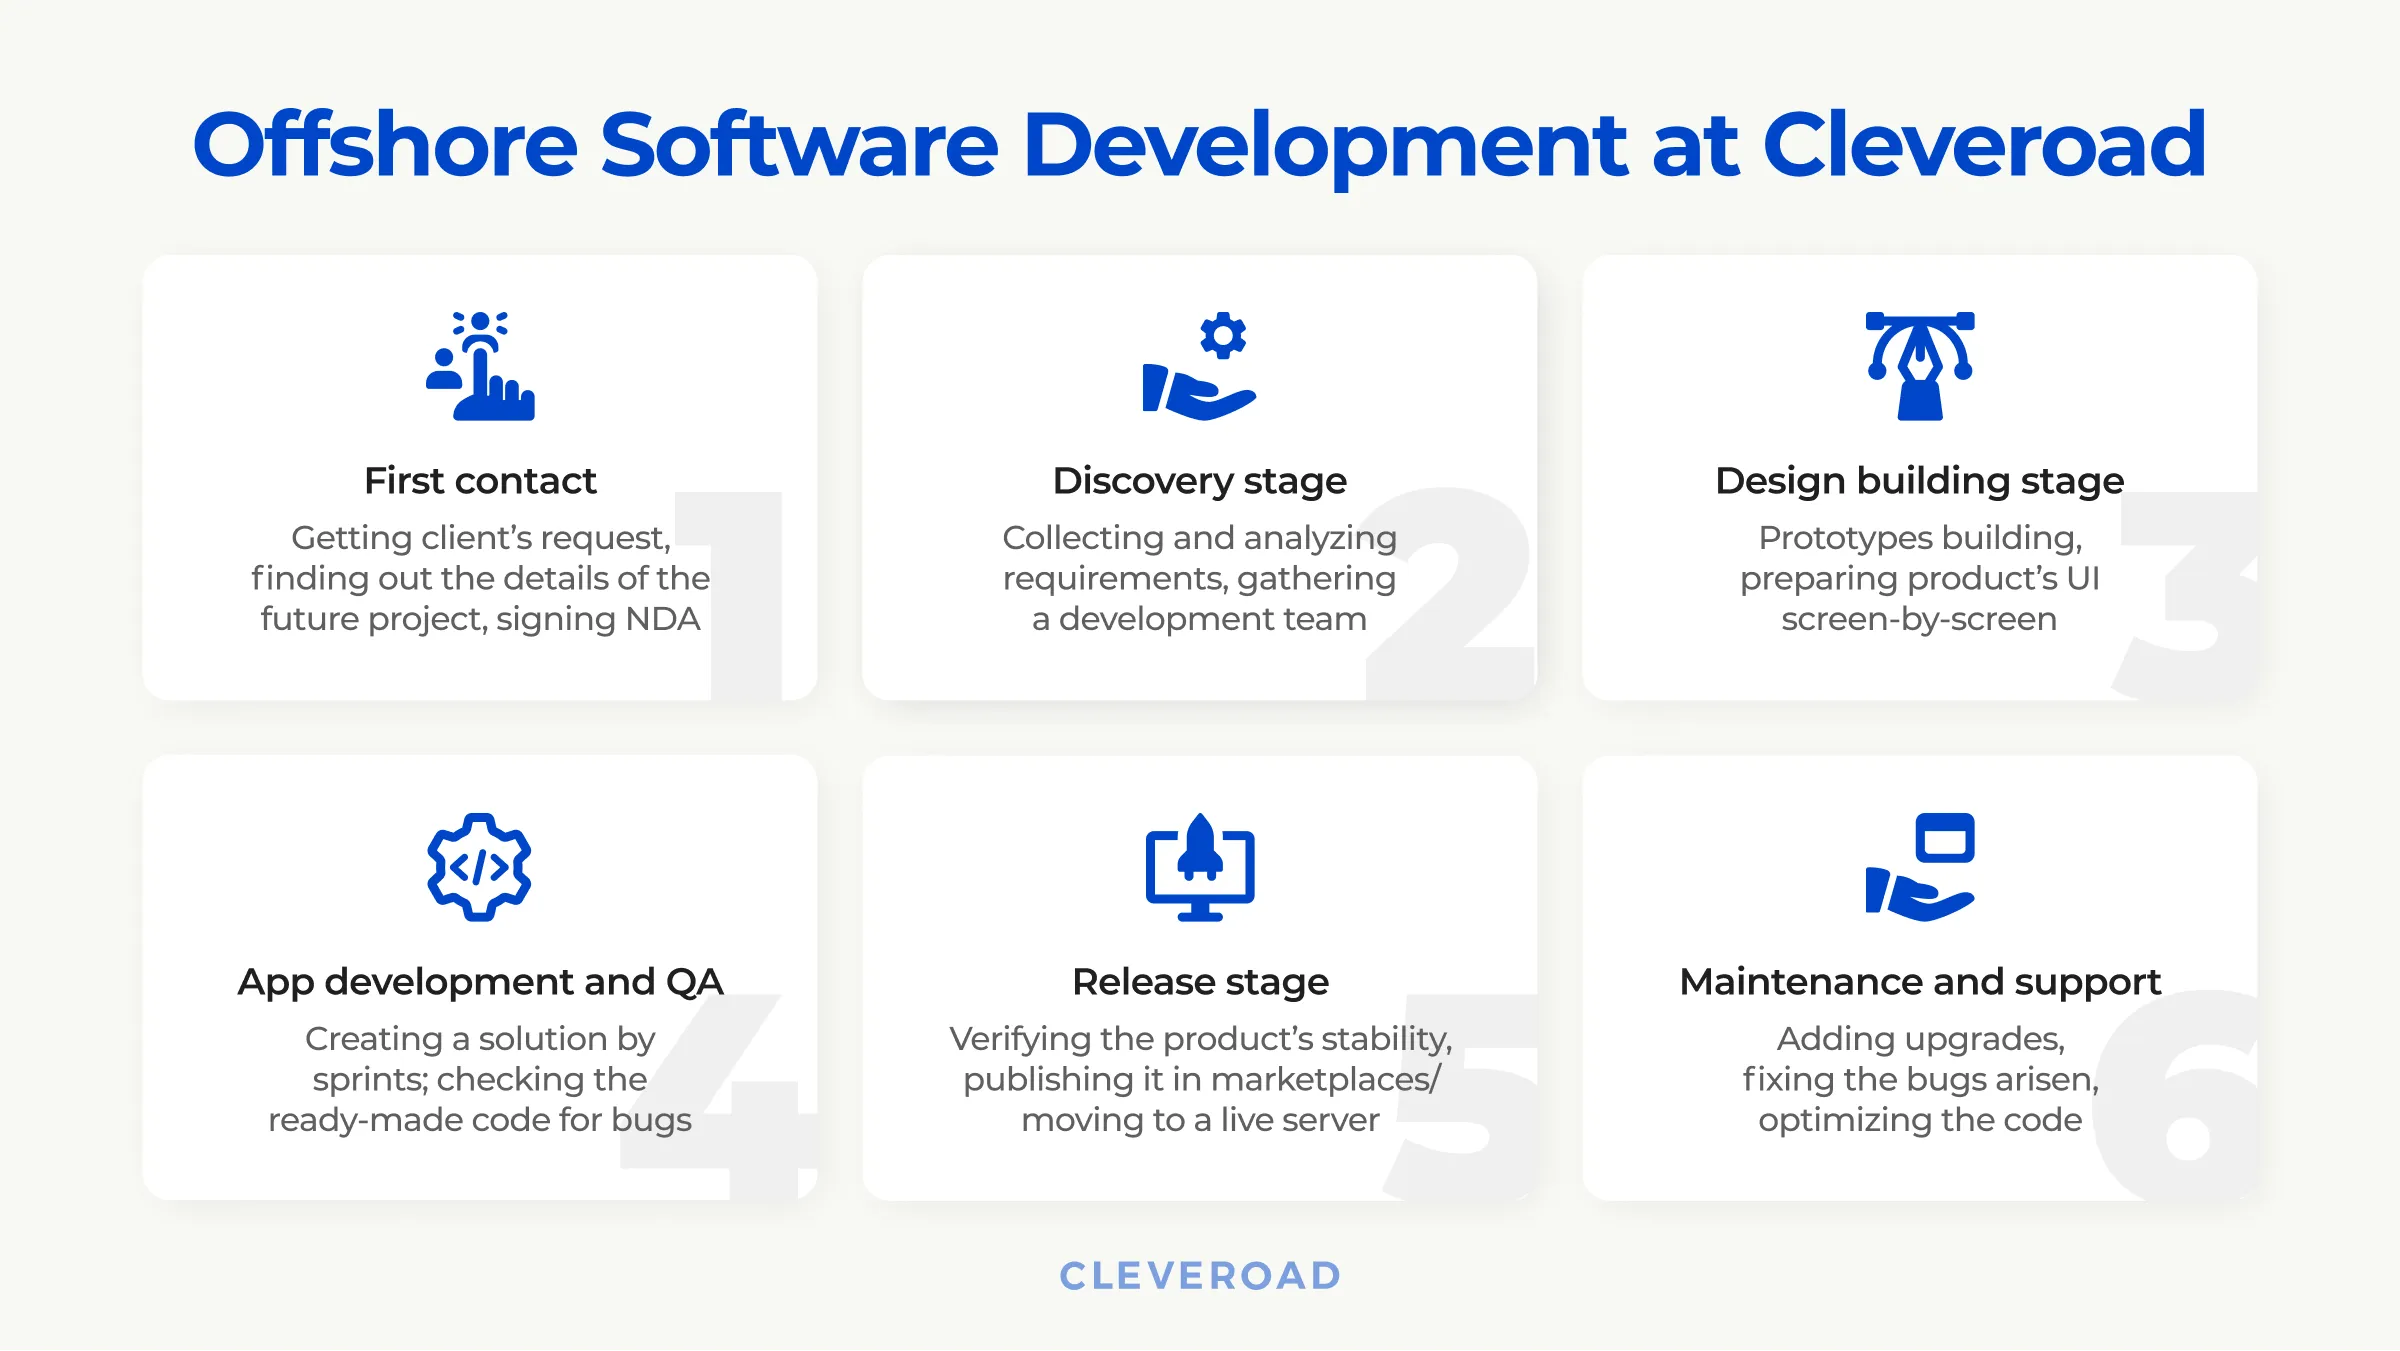 Offshore software development at Cleveroad